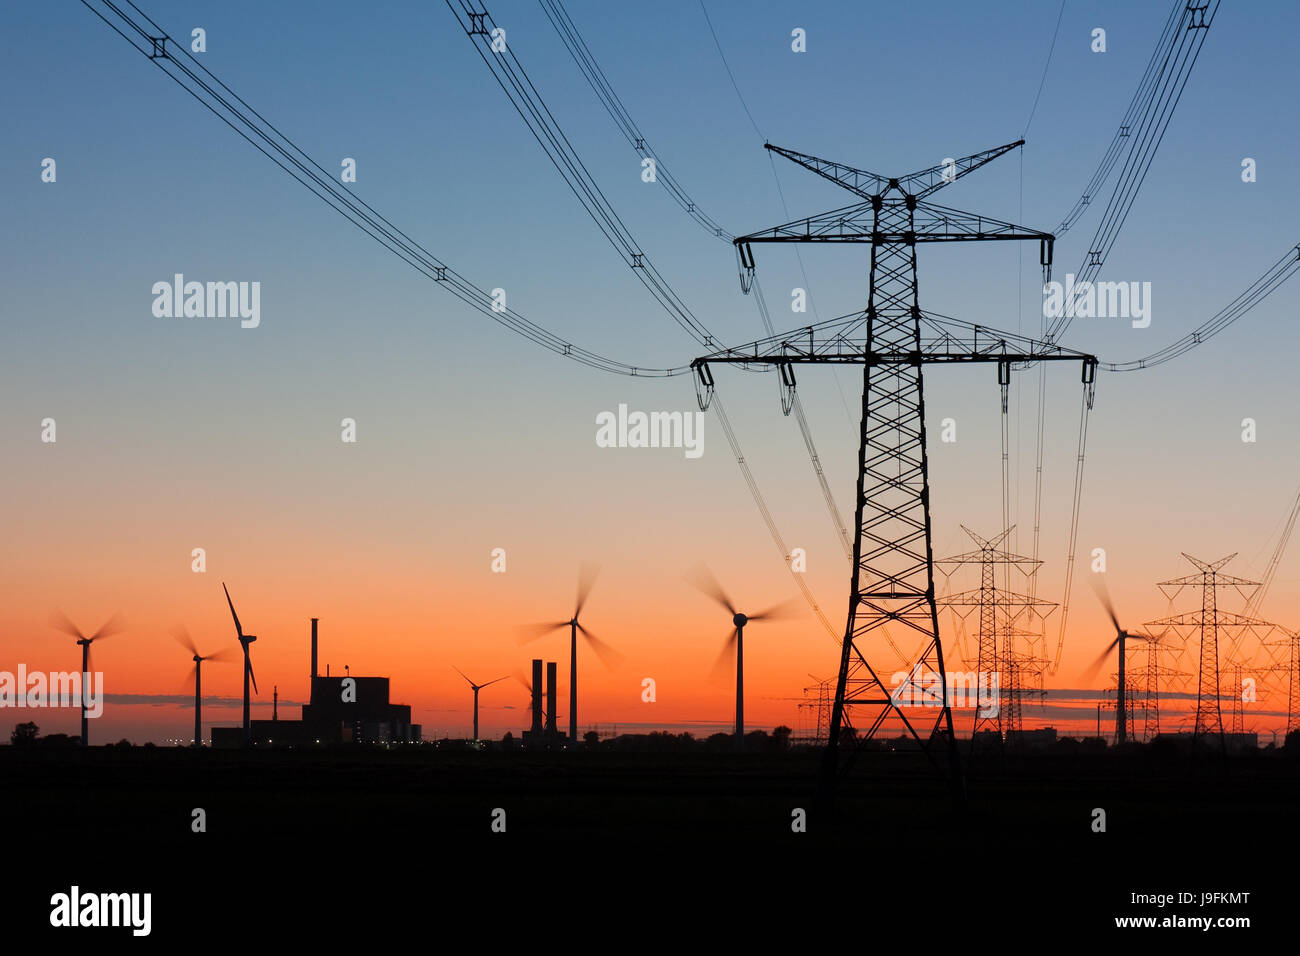 sunset, energy, power, electricity, electric power, wind energy, current mast, Stock Photo